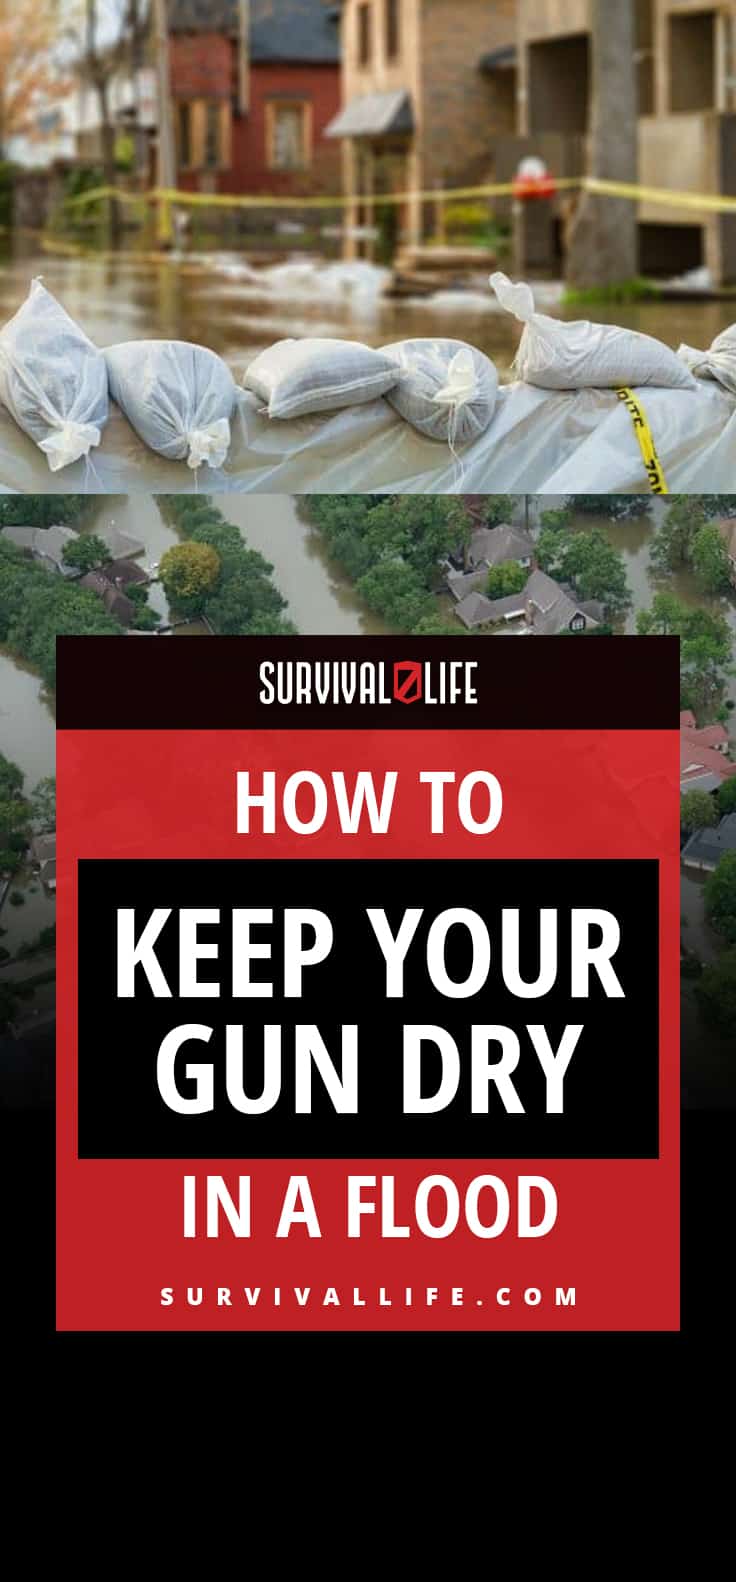 How to Keep Your Gun Dry in a Flood